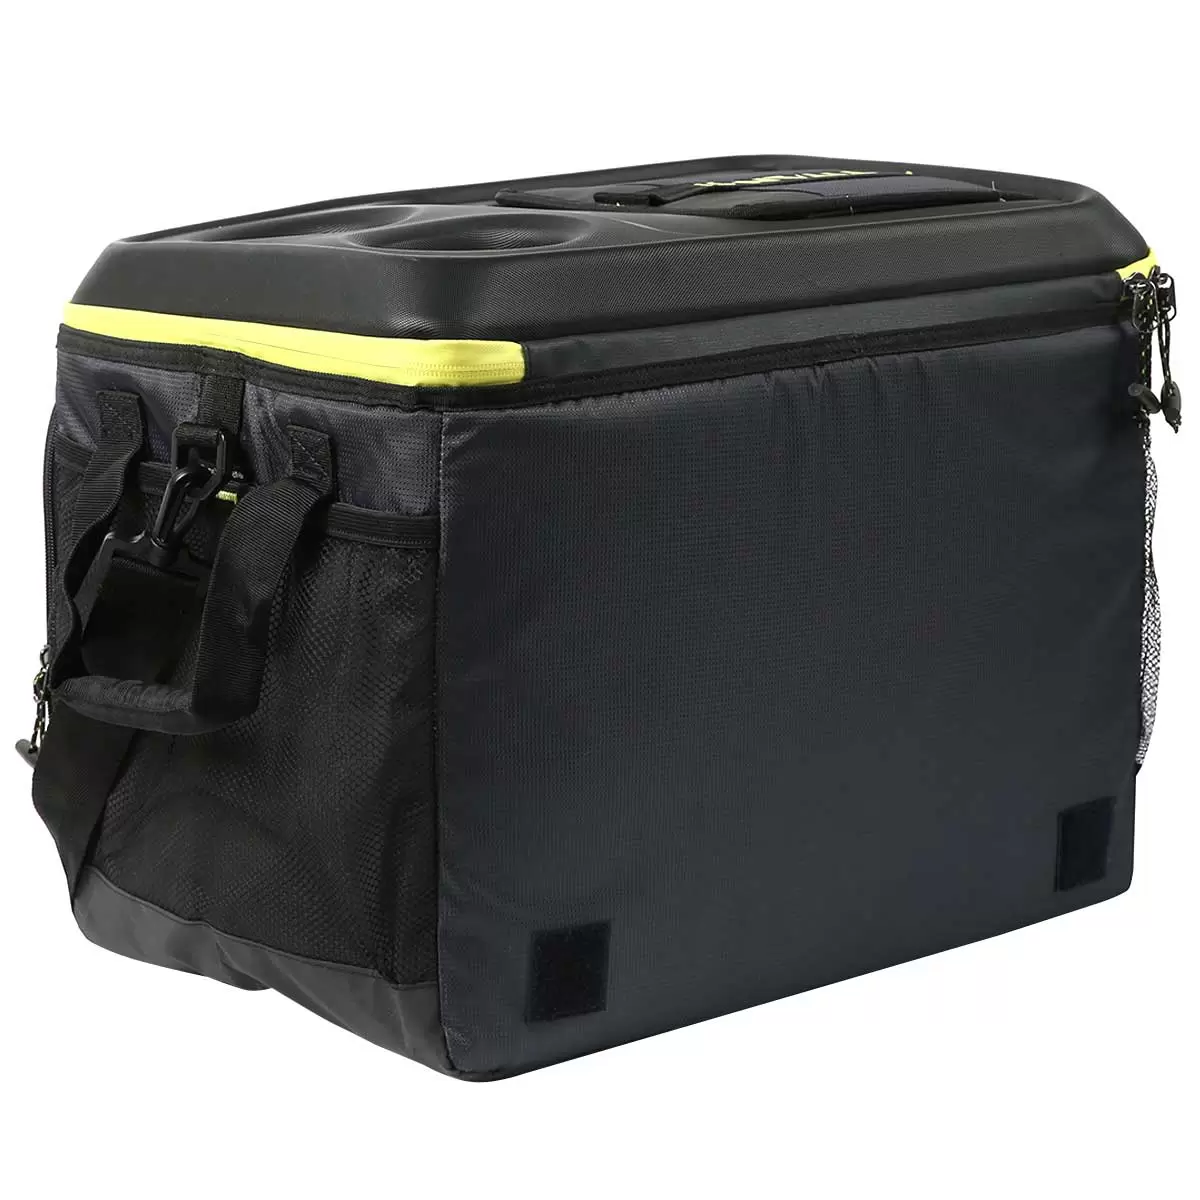 Titan 50 Can Collapsible Cooler Ebony